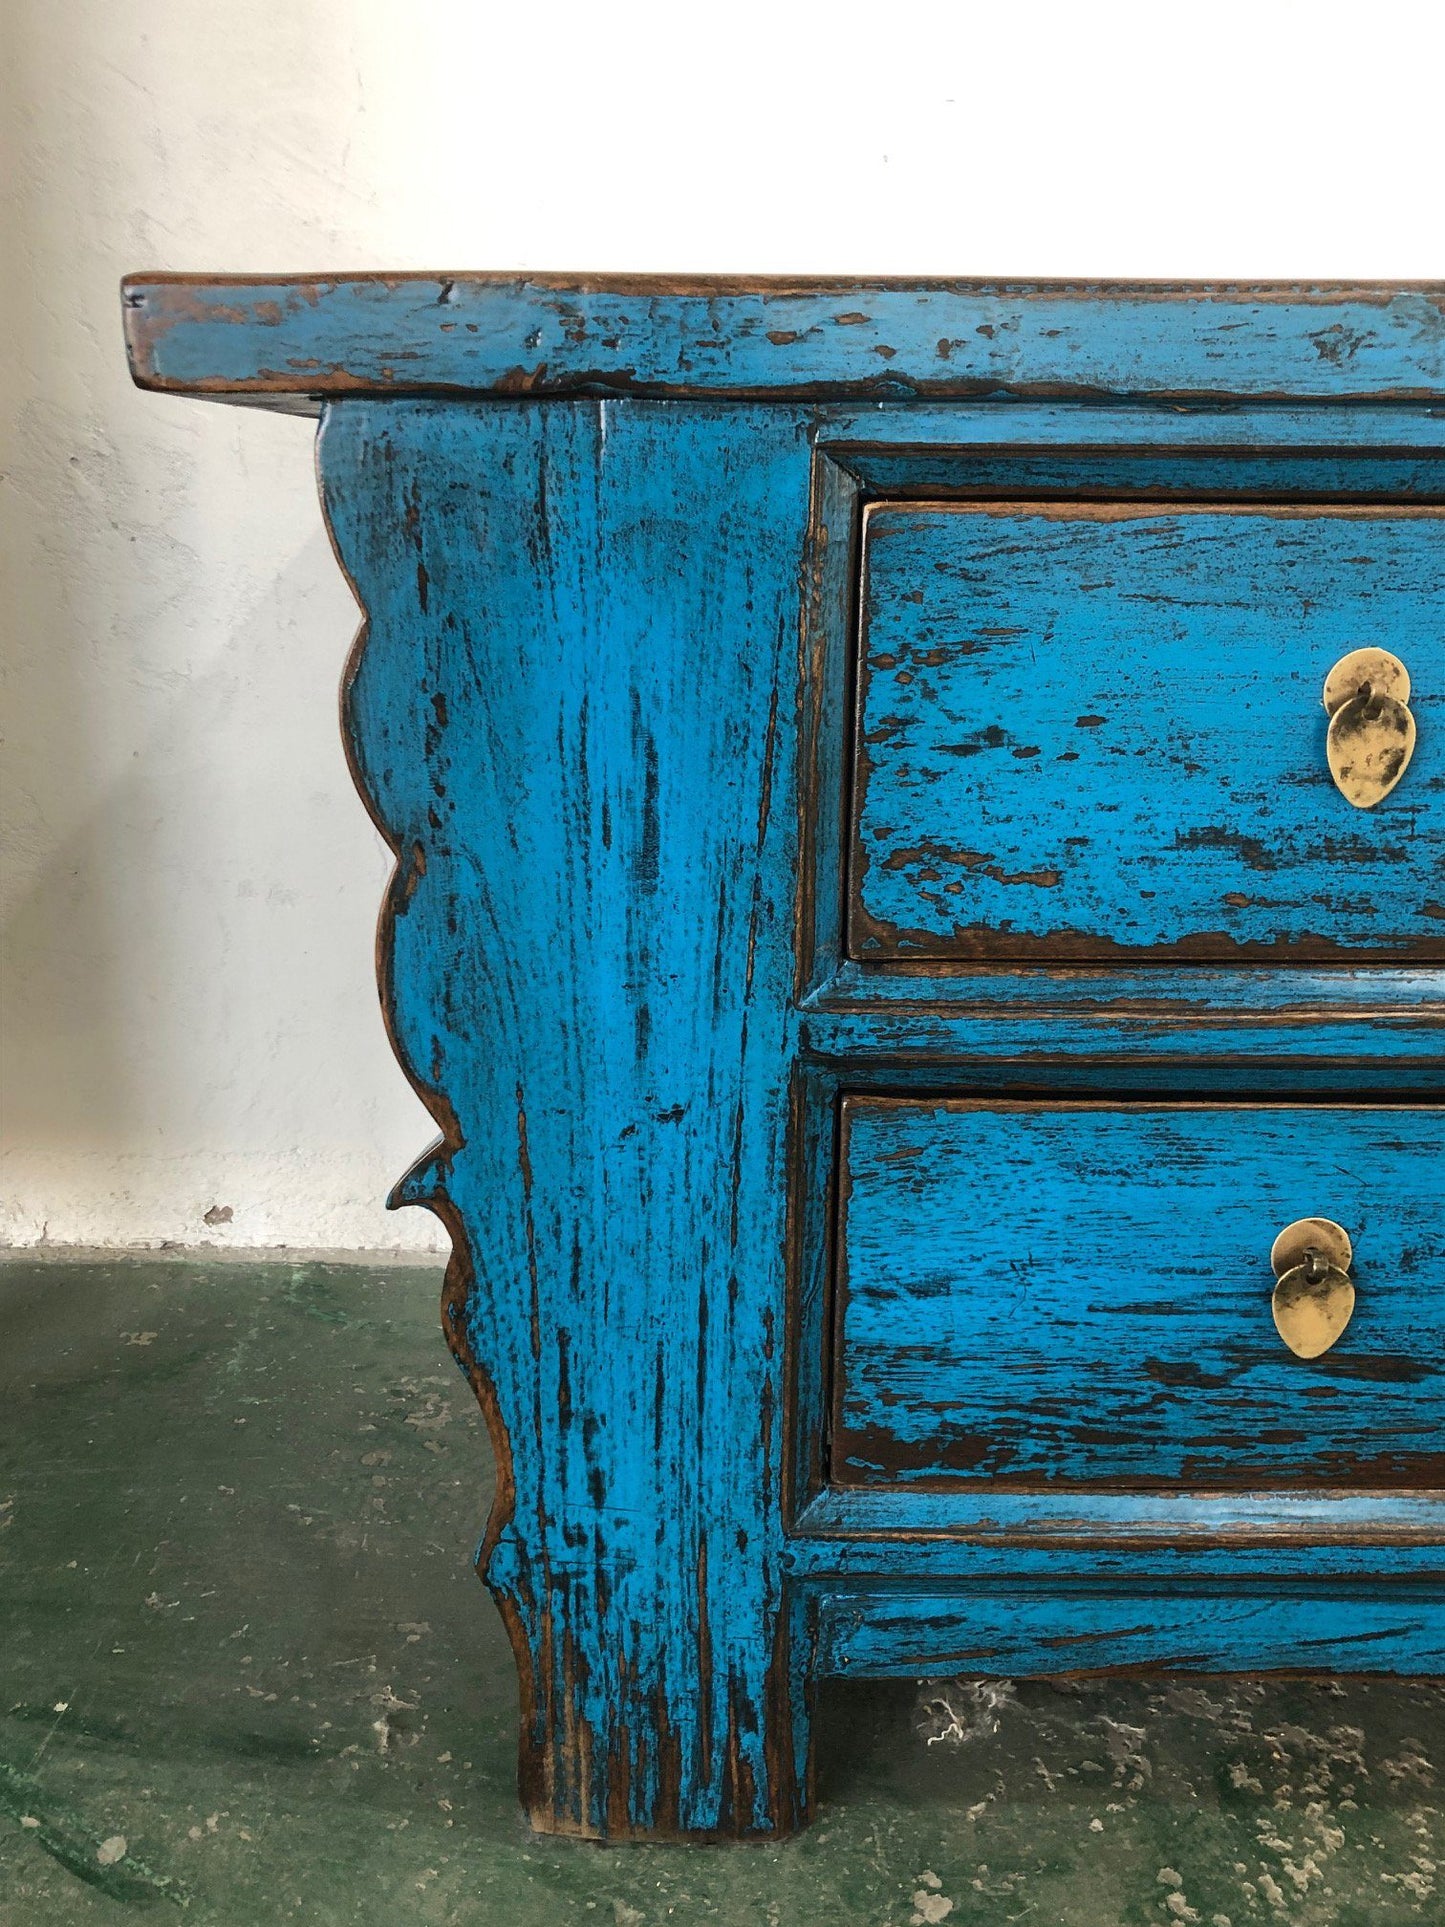 Asian Lowboard Chest of Drawers Bench Blue - Art. 35208-1